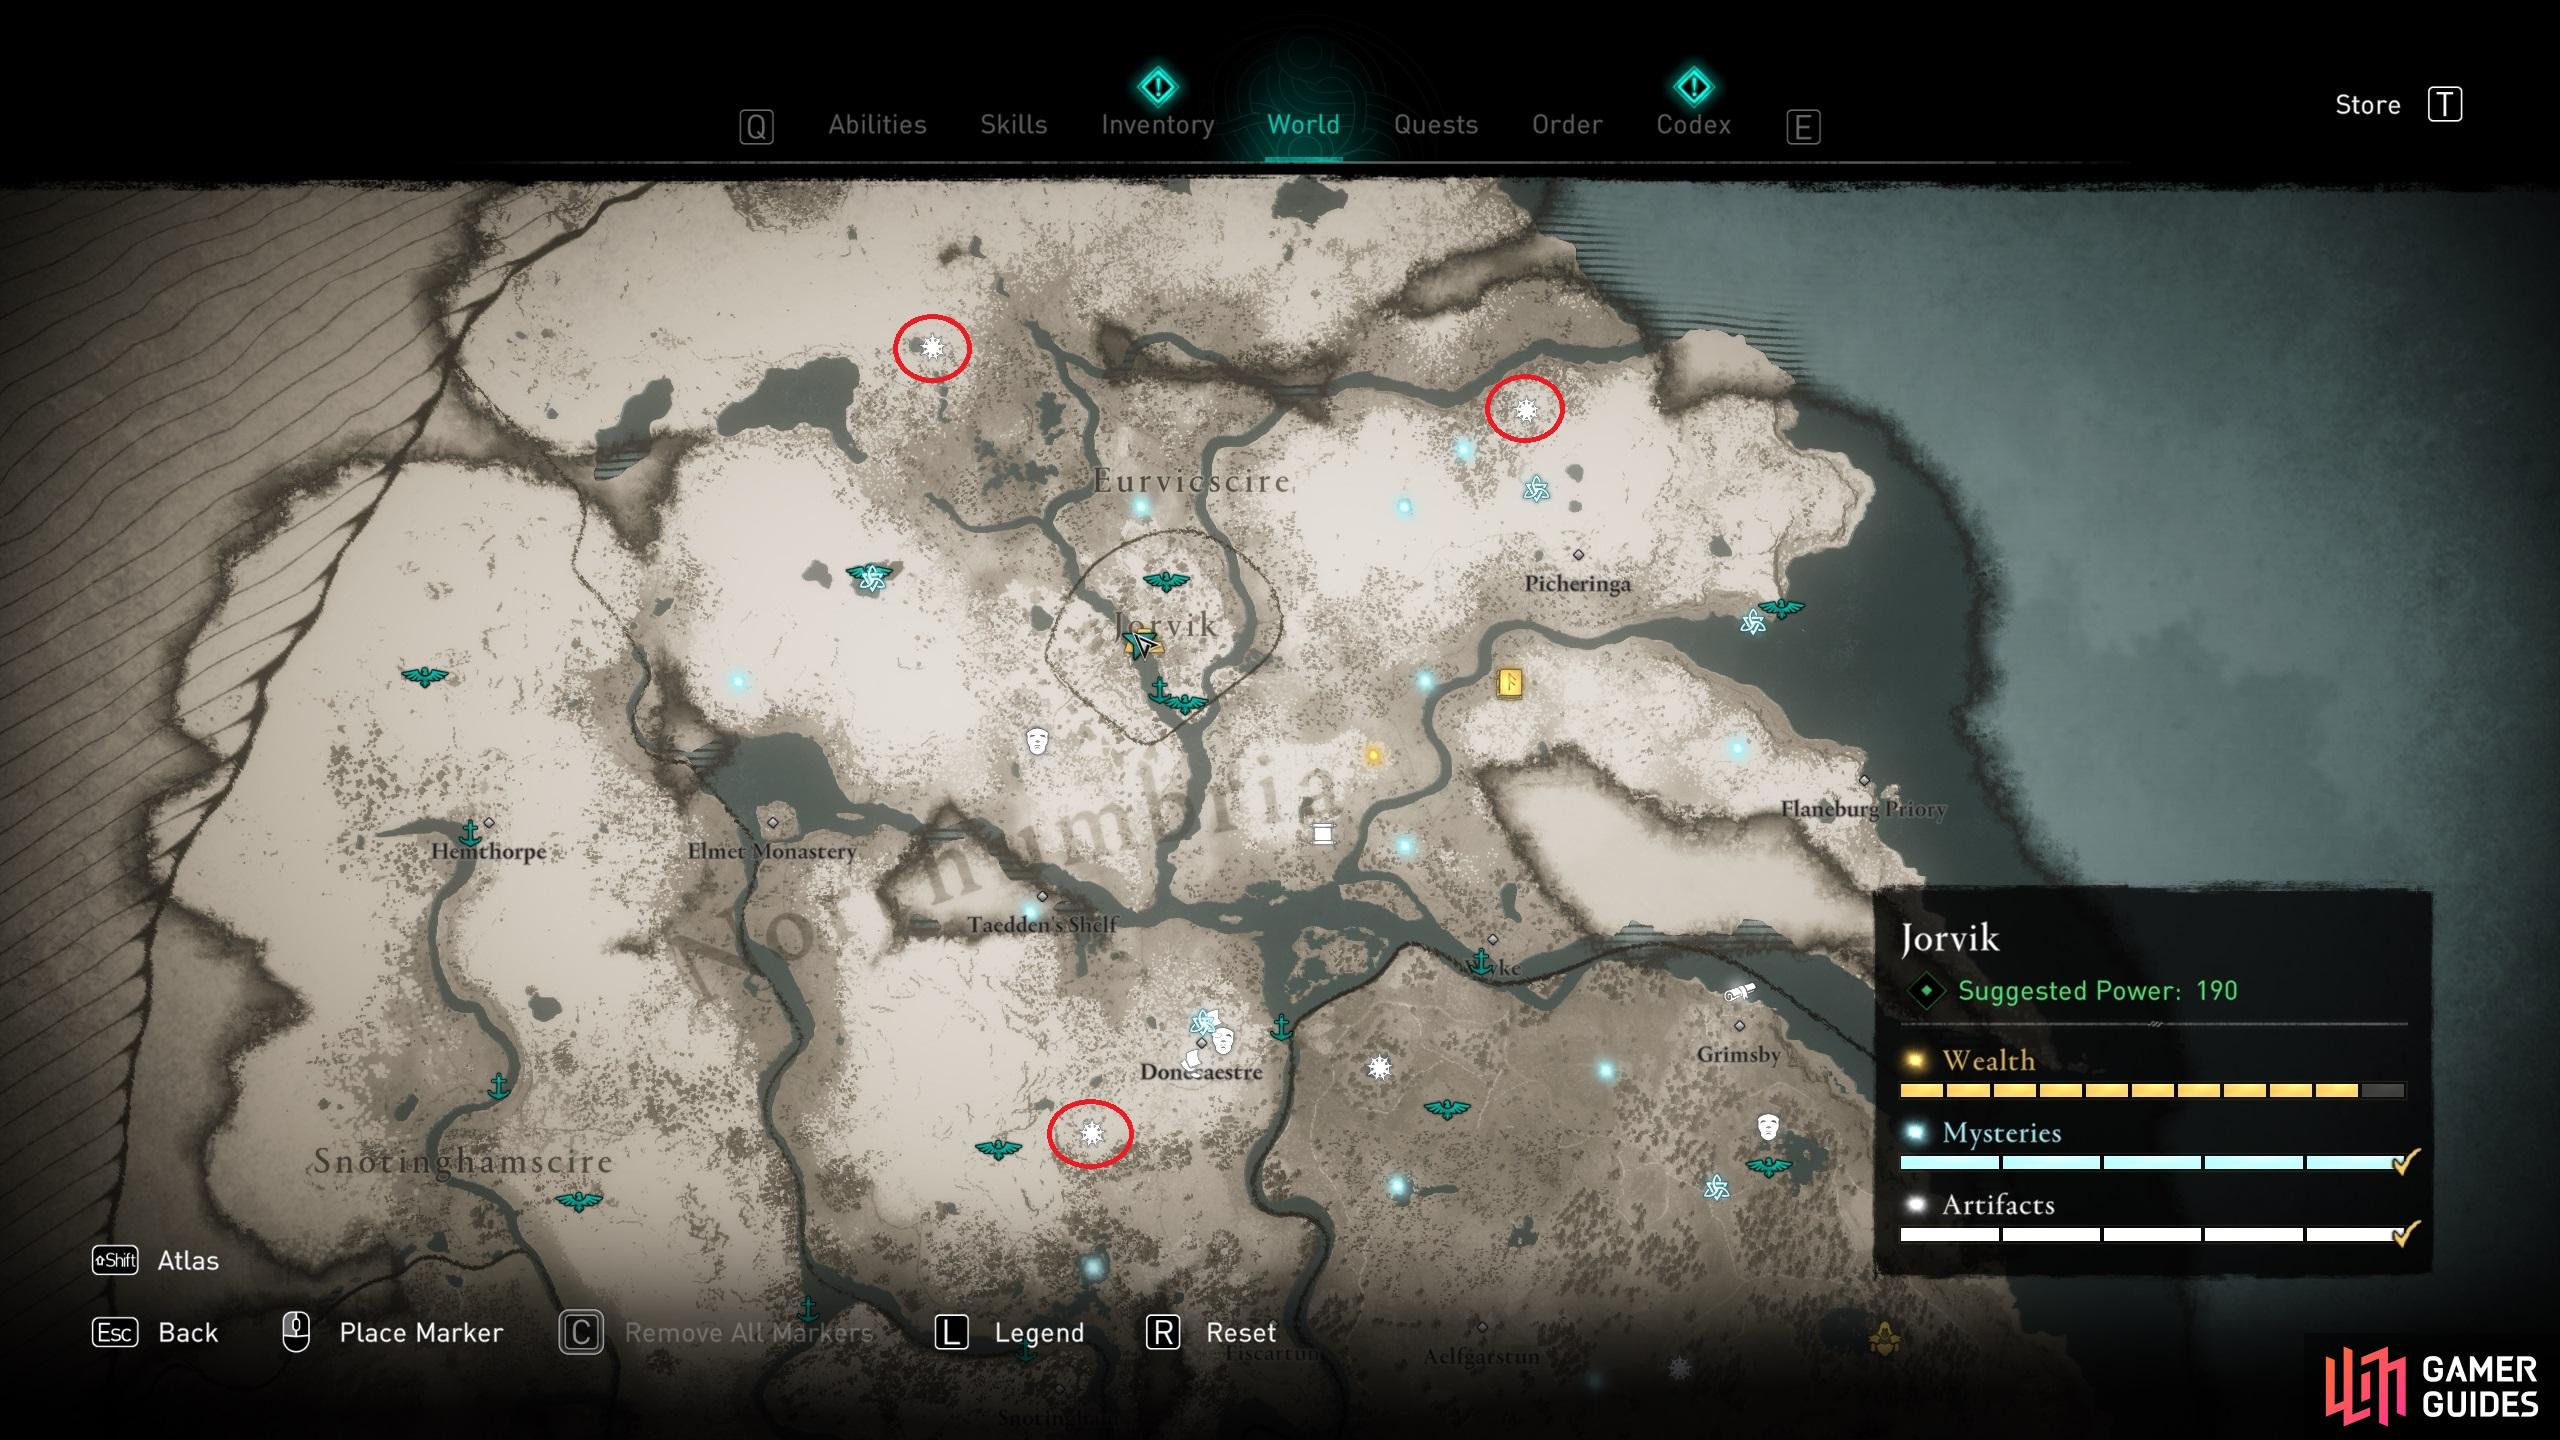 The locations of the Cursed Areas in Eurvicscire, where the keys to the chest can be found.